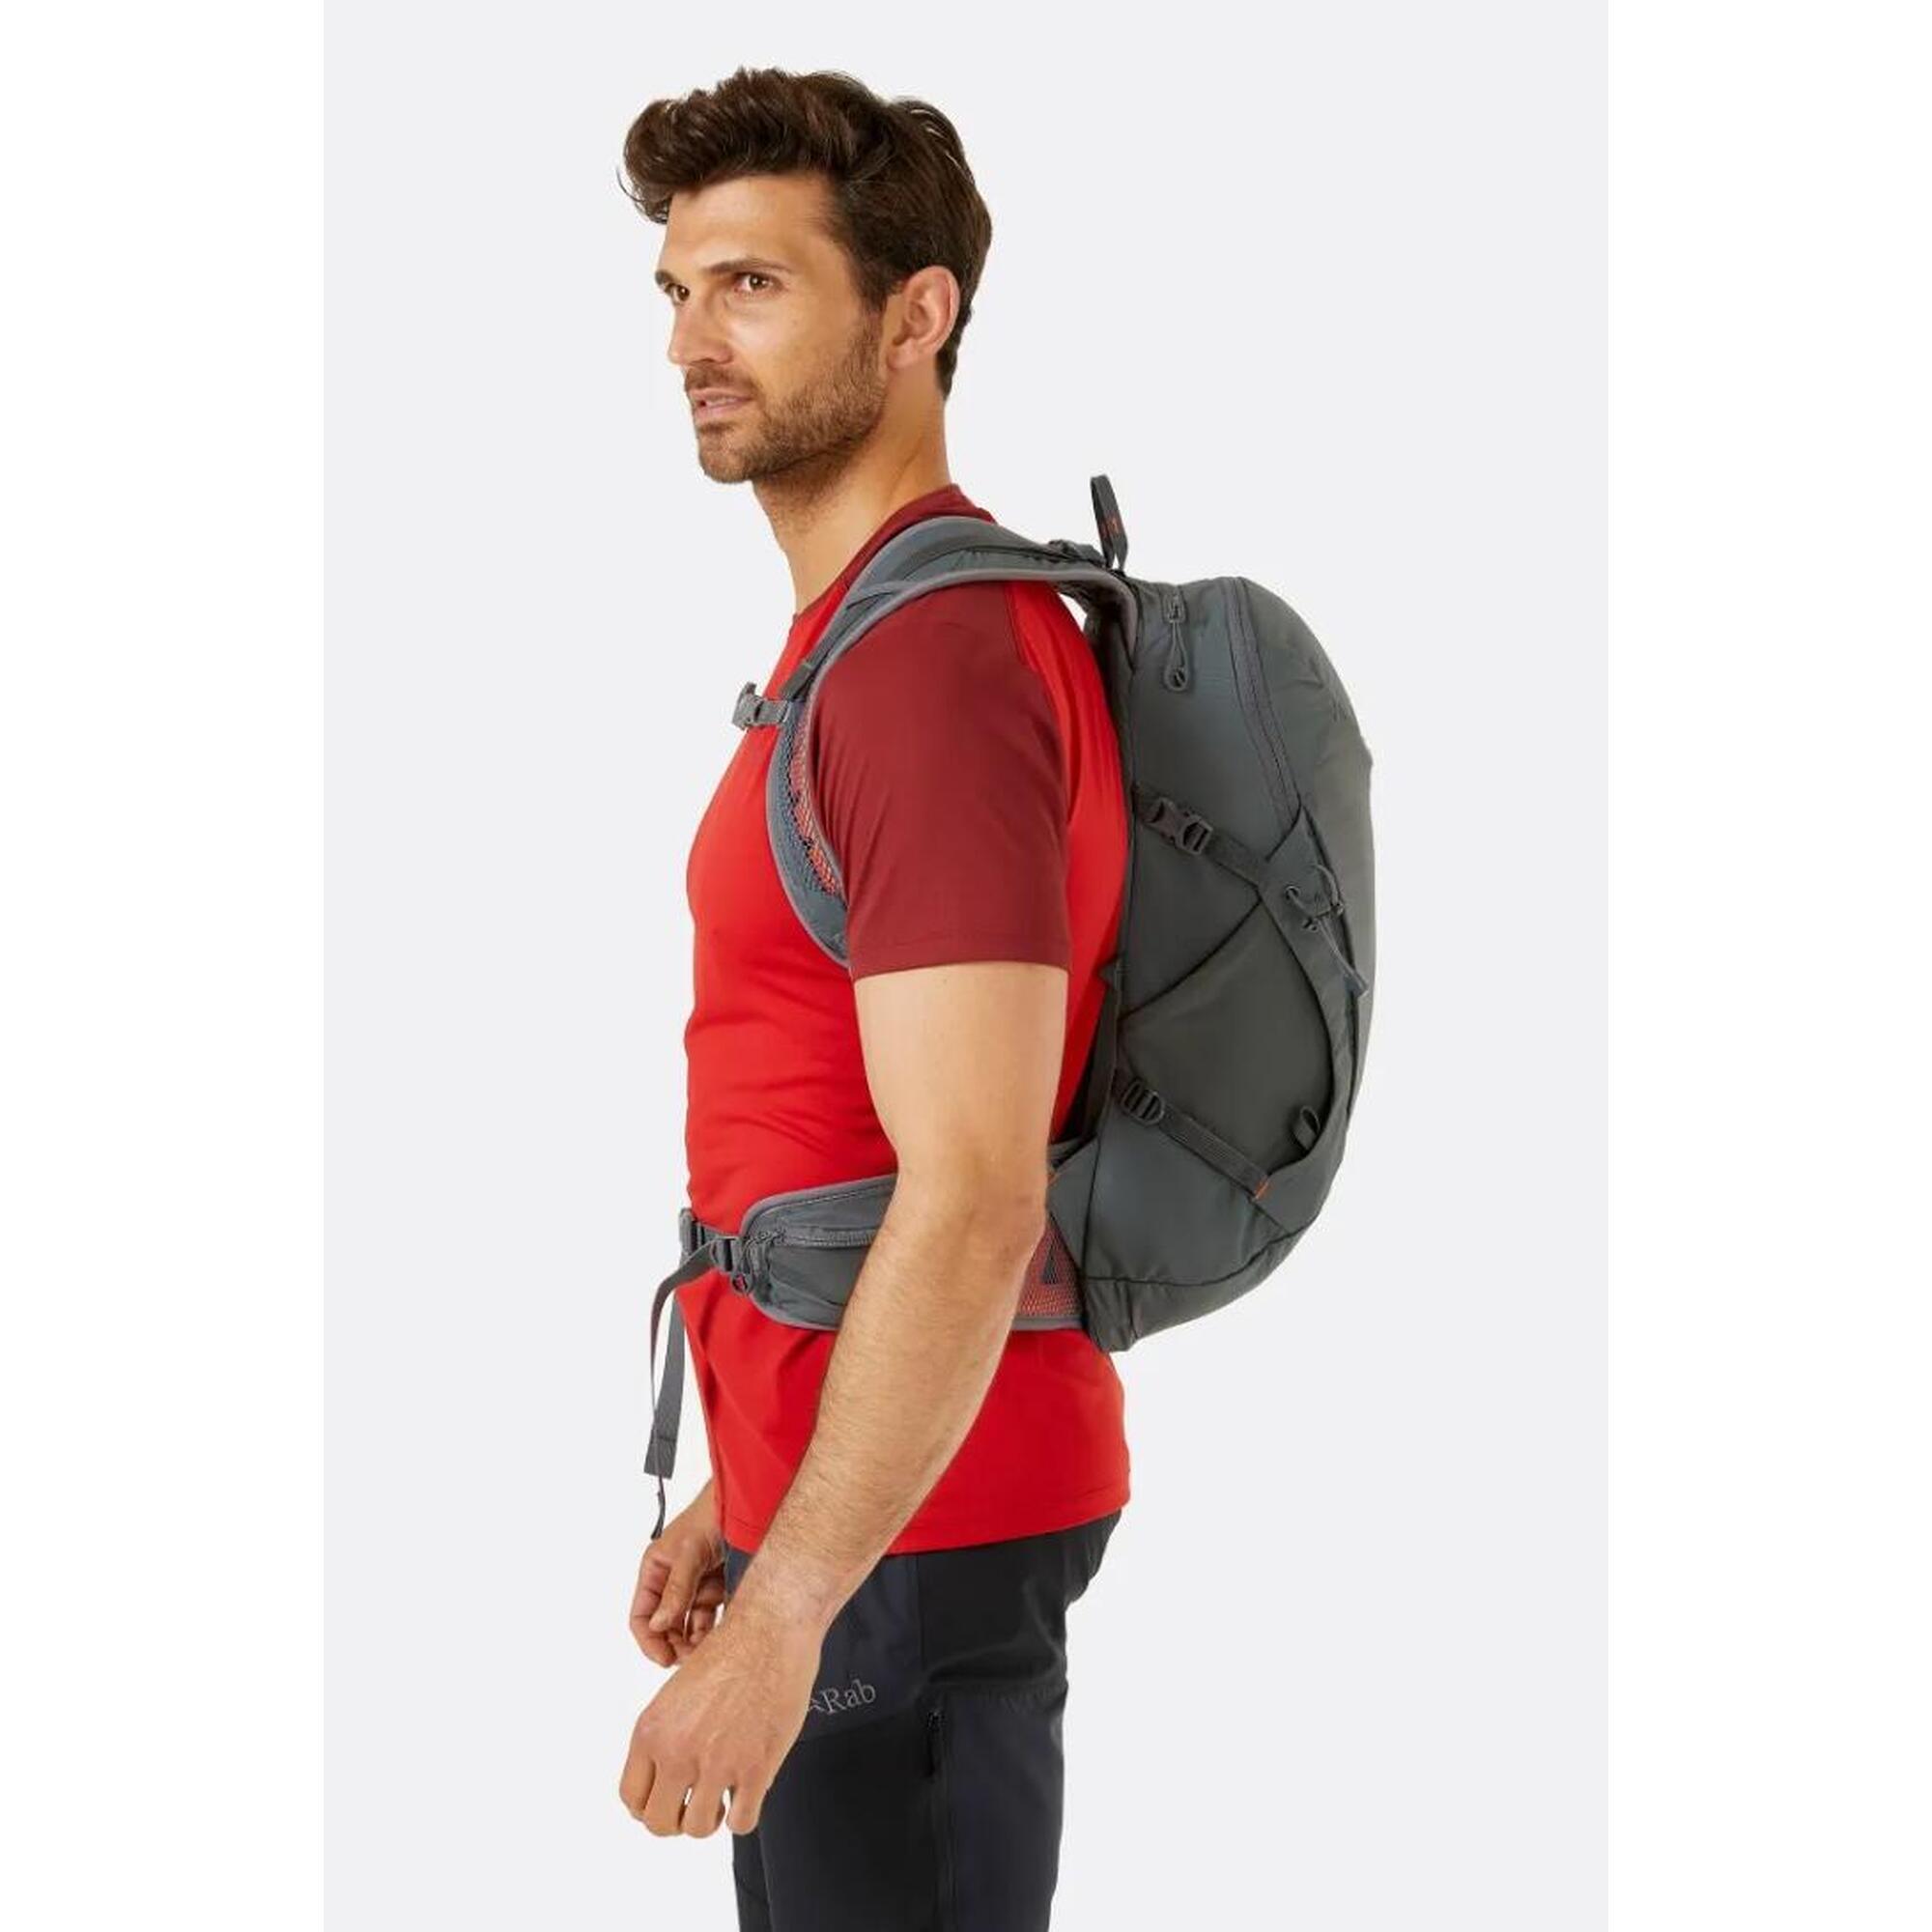 Aeon Backpack 20L - Blue